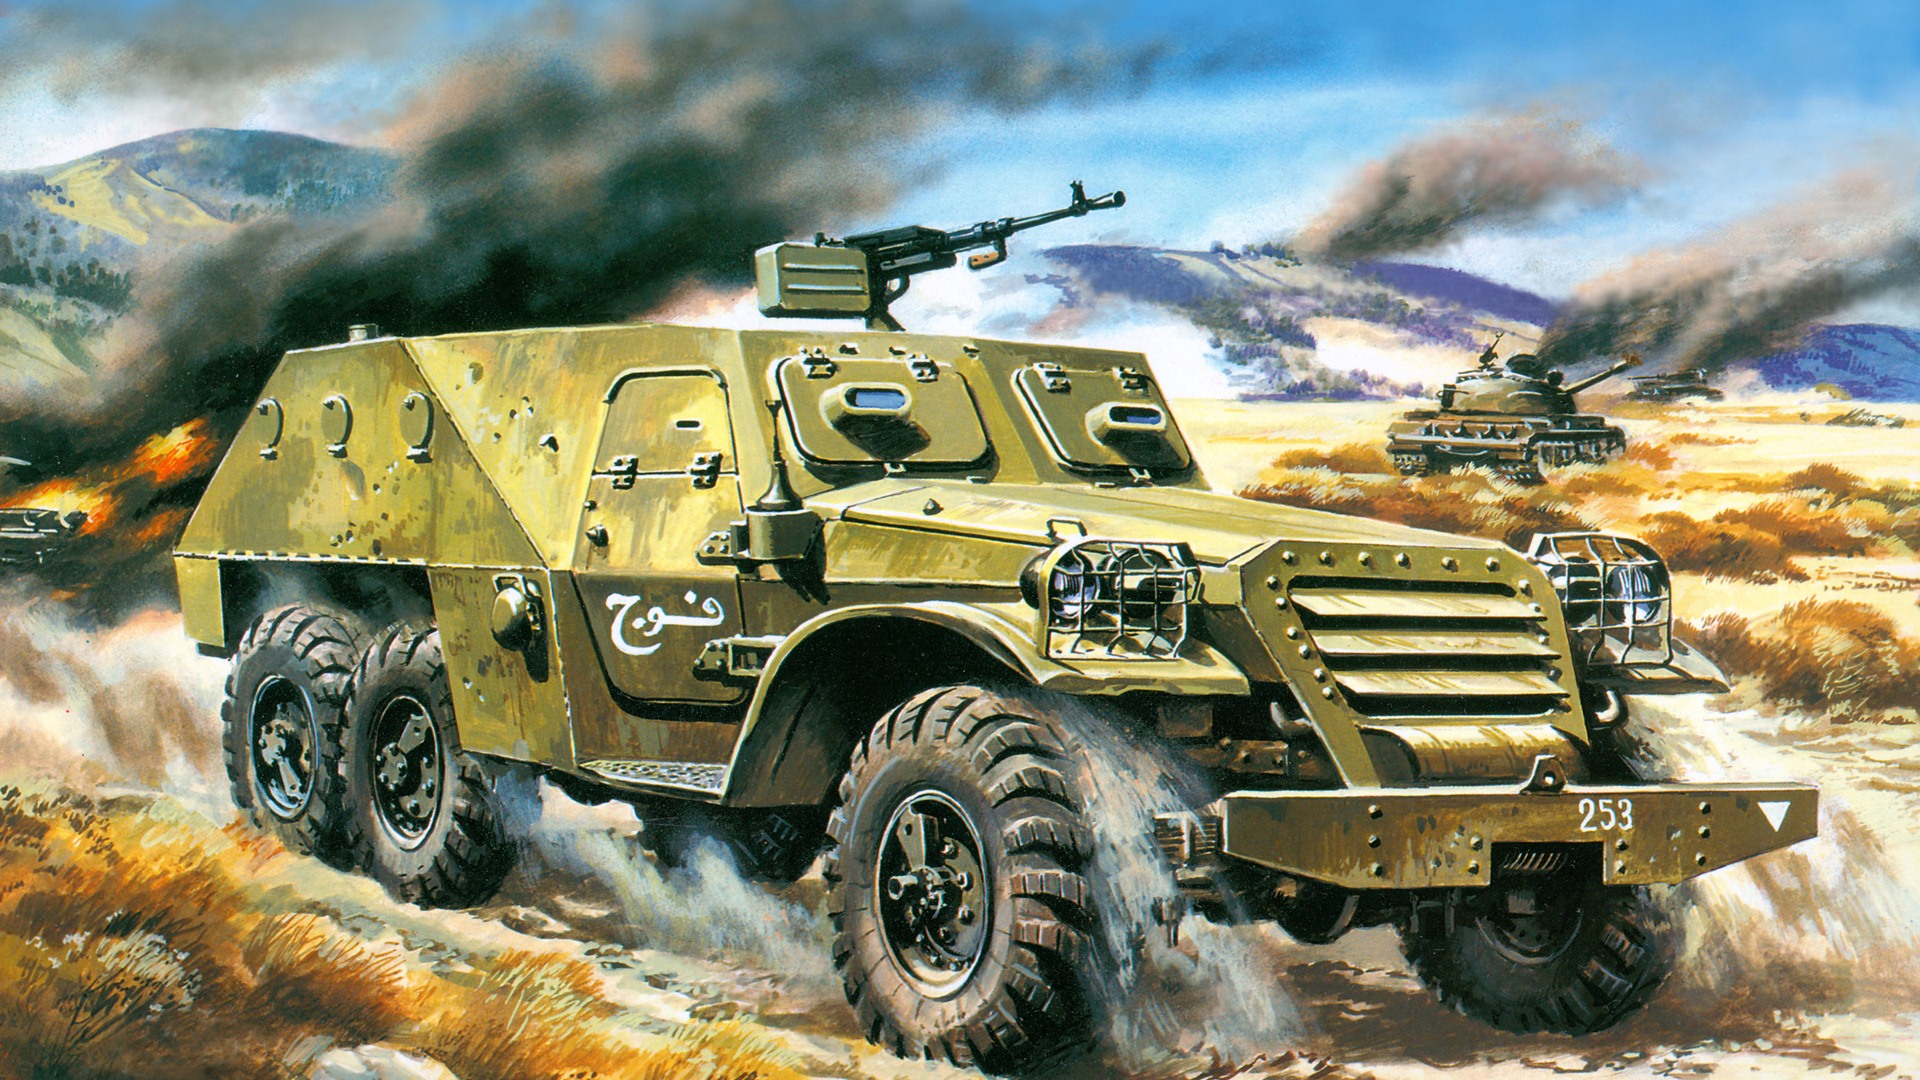 Military tanks, armored HD painting wallpapers #17 - 1920x1080